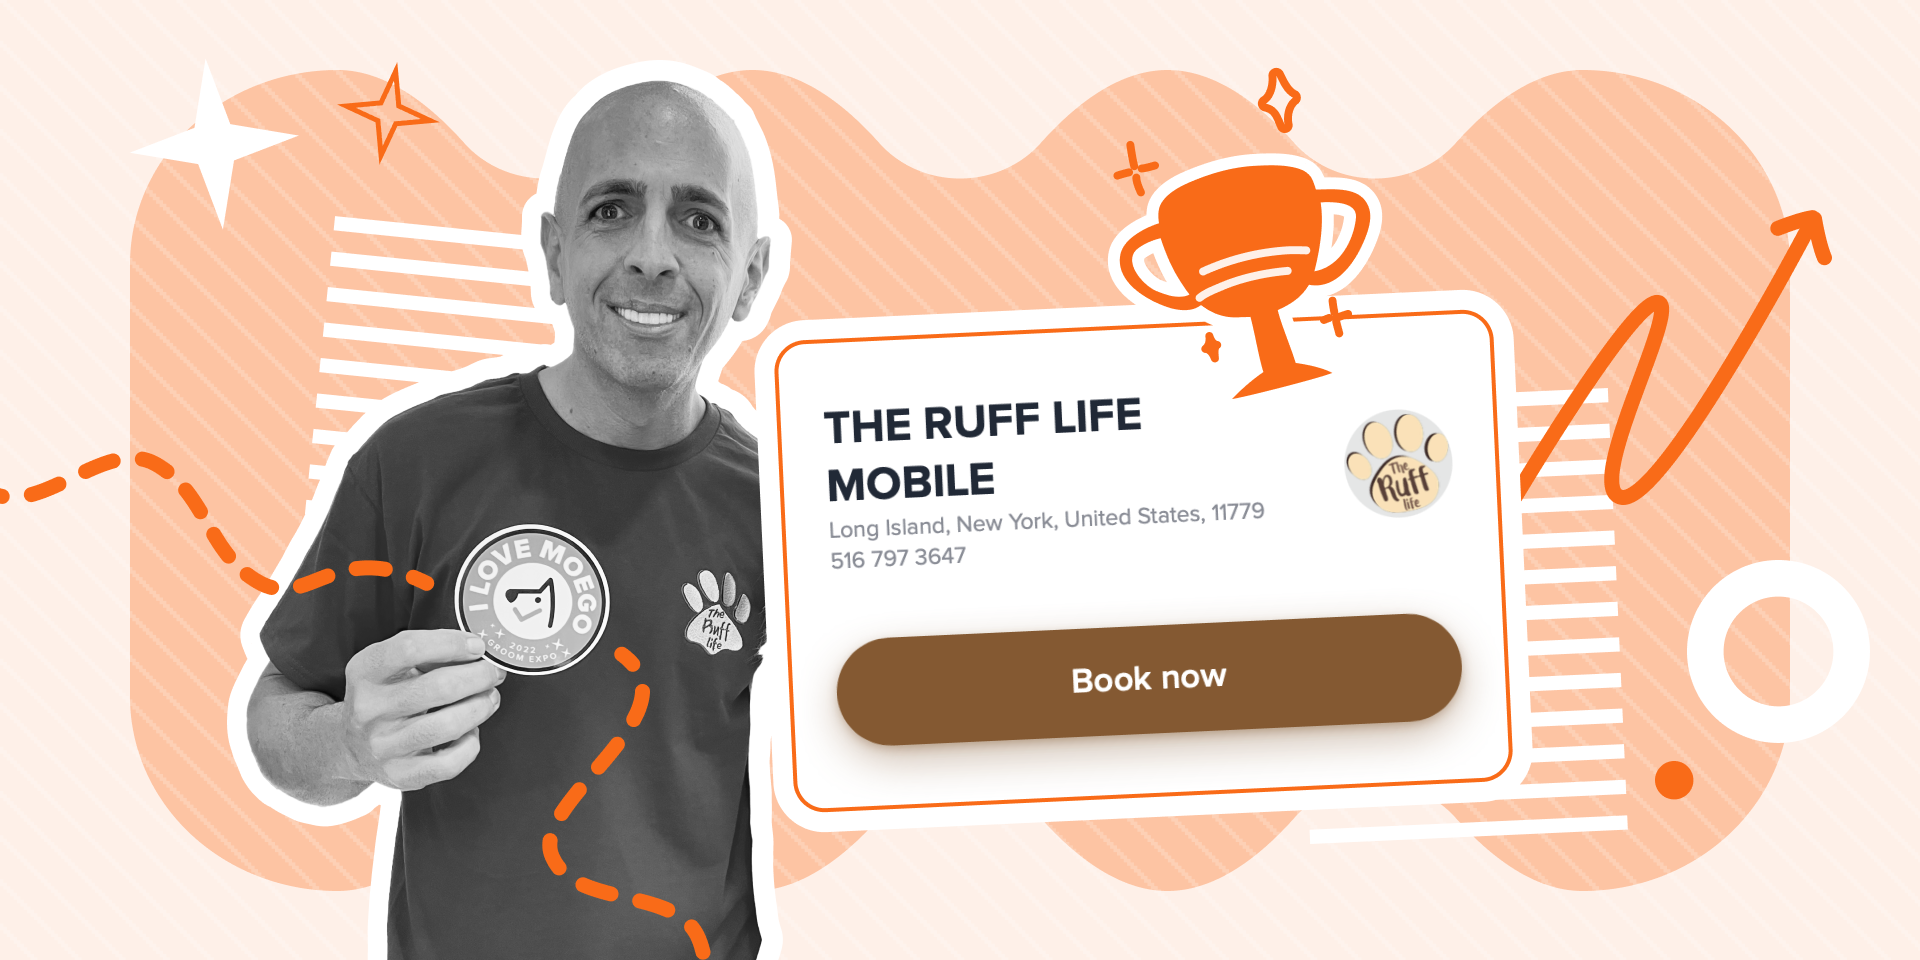 Chris from the ruff life holding MoeGos logo near a CTA button that says book now